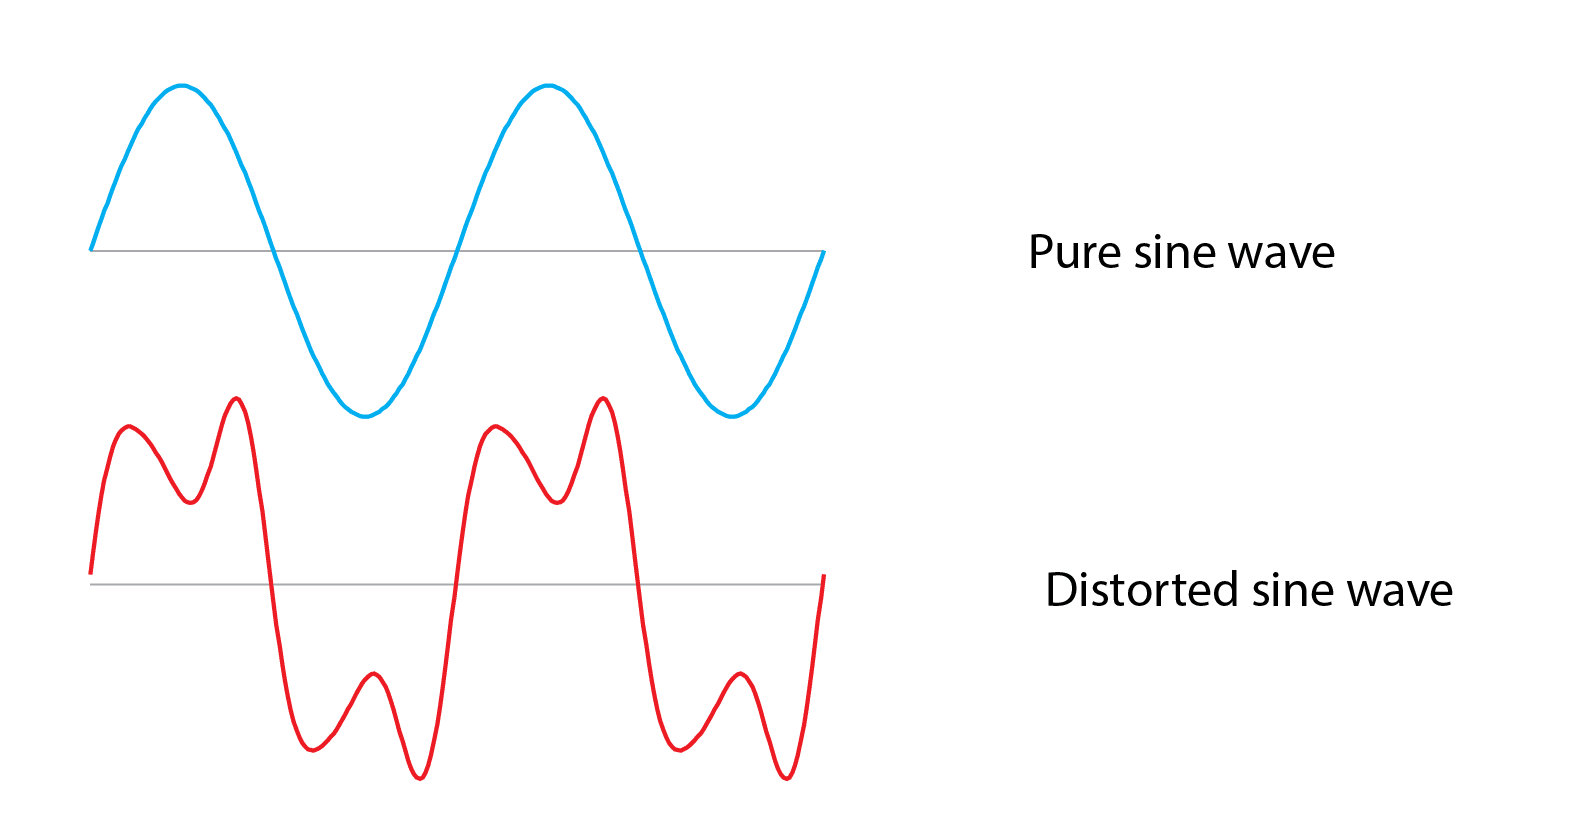 Harmonics can distort the shape of voltage and current waveforms, leading to a non-sinusoidal waveform. This distortion can affect the performance of electrical equipment and devices.